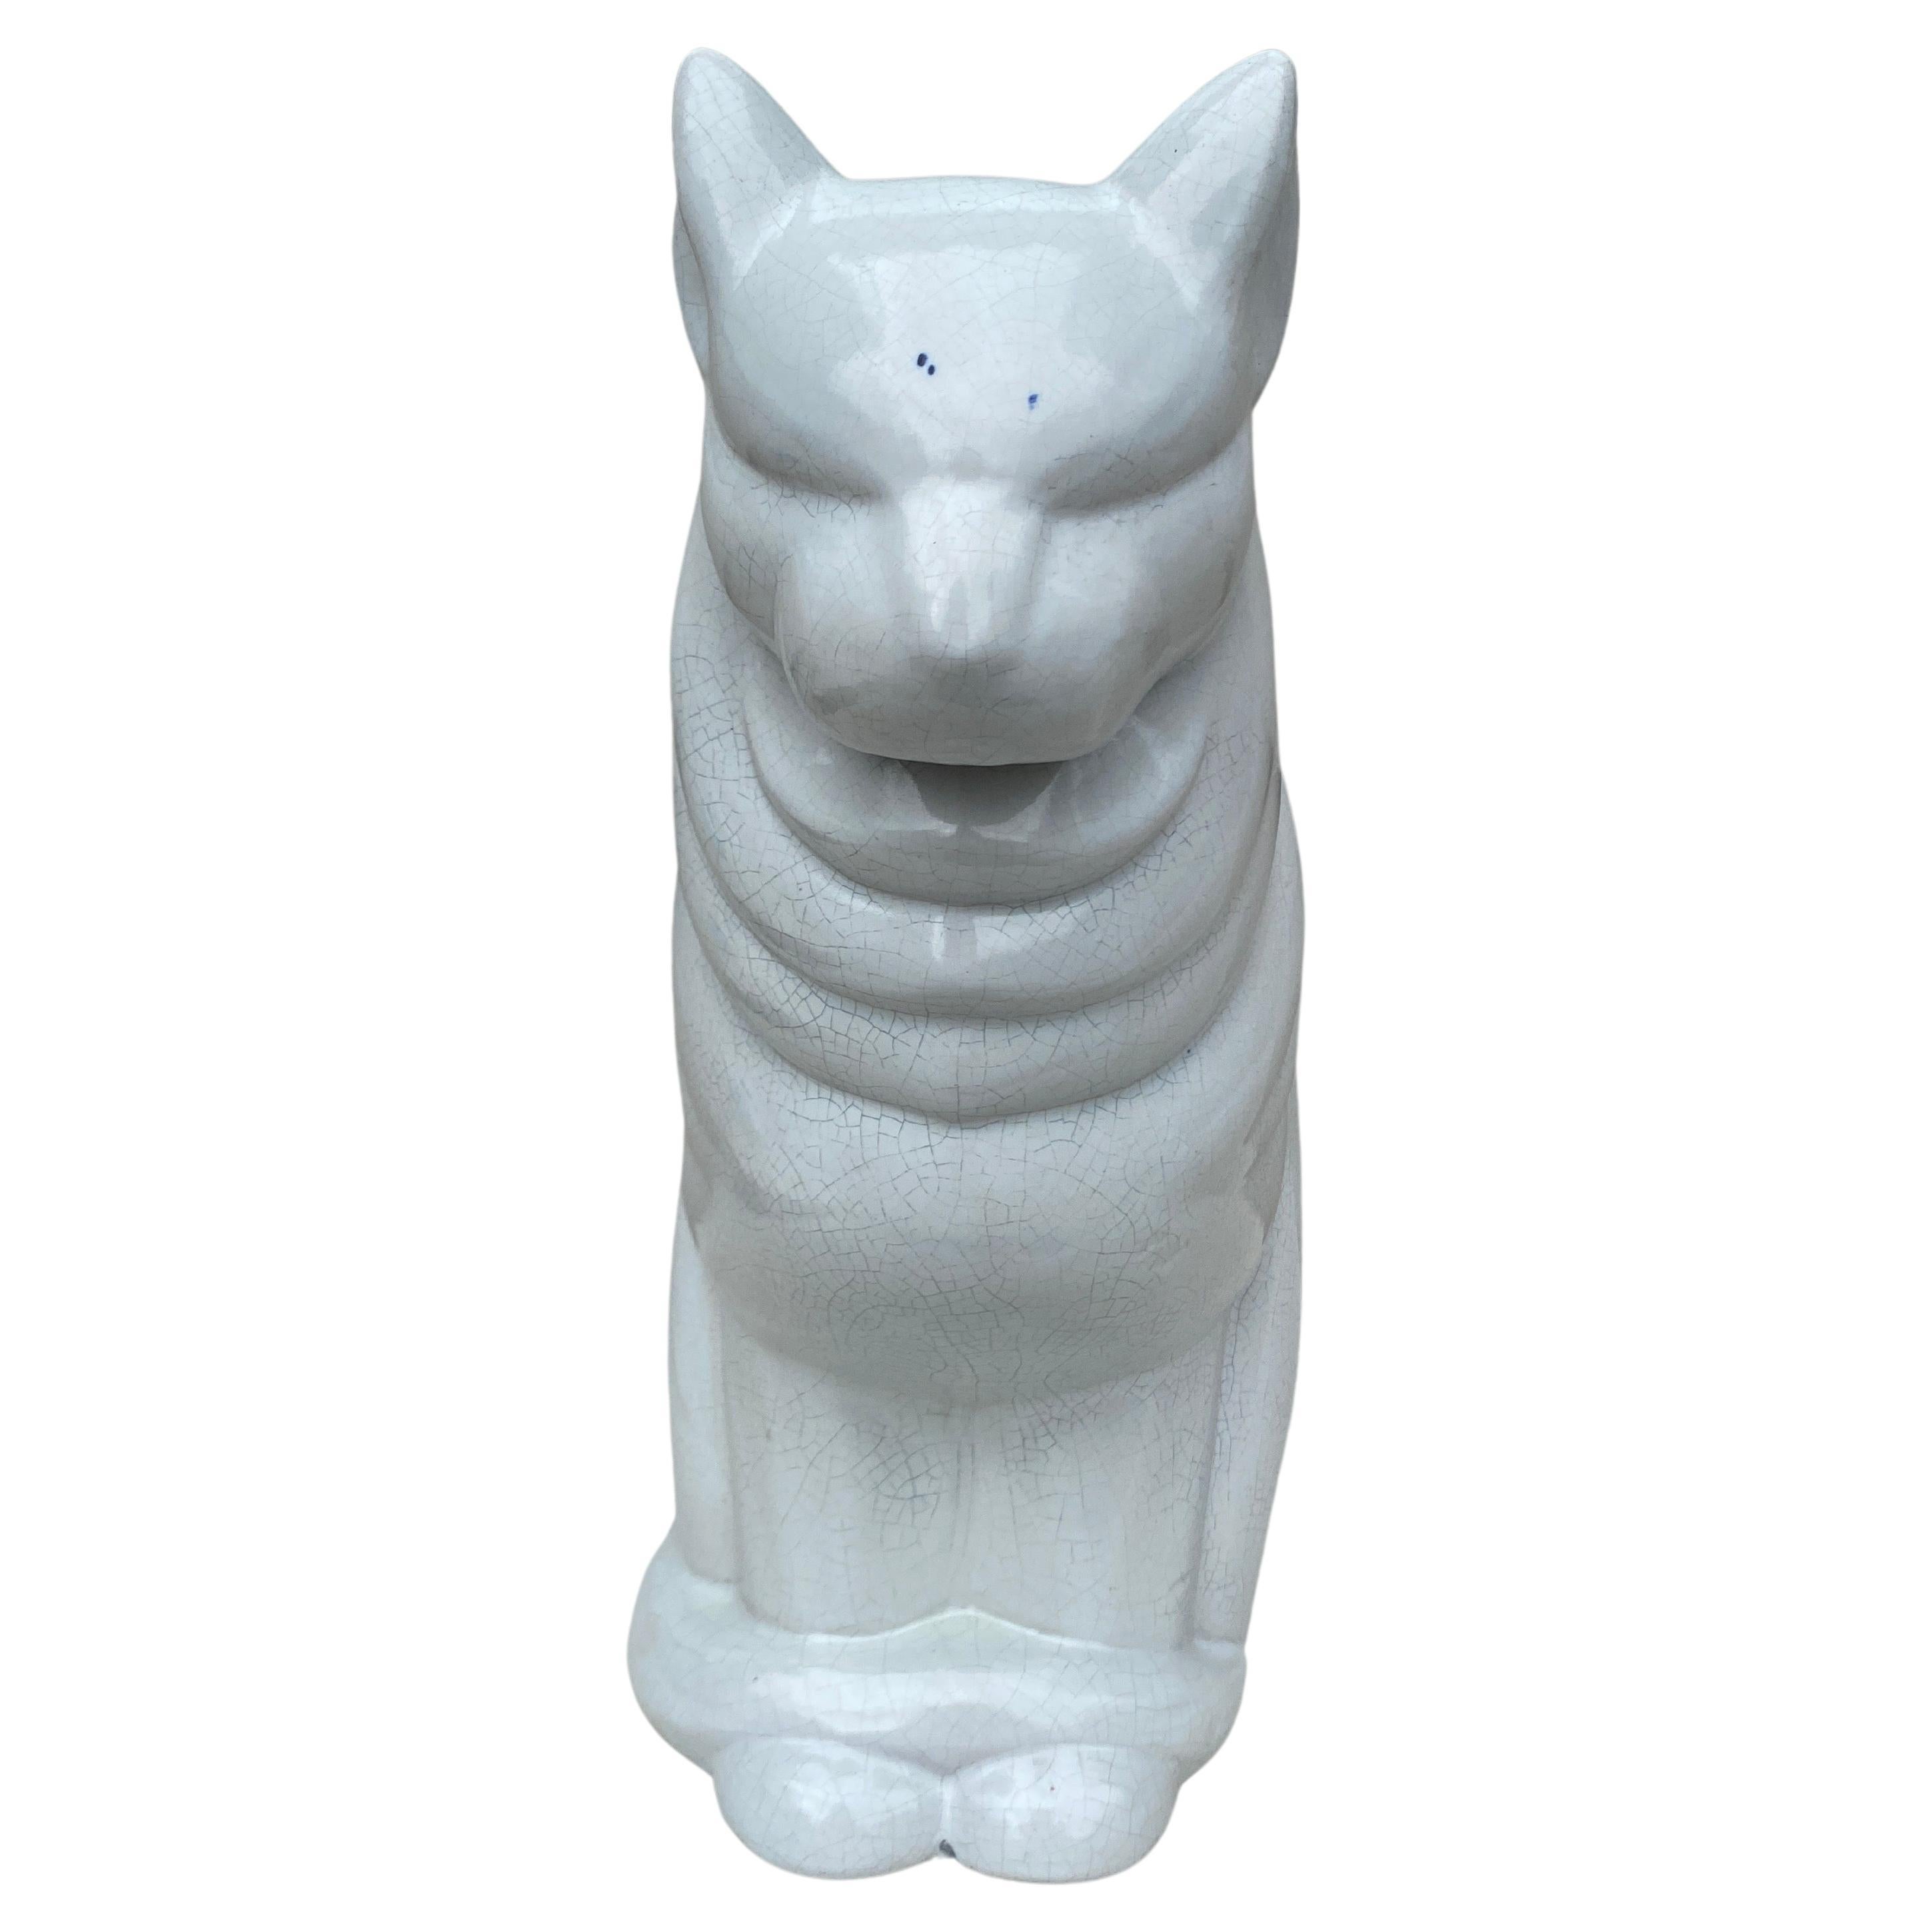 Large Rare White Faience Cat Art Deco Jacques Adnet.
Made by Henri Delcourt a Boulogne (1917-1935) for the Maitrise.
Signed Adnet and Henri Delcourt.
 
 
  
    